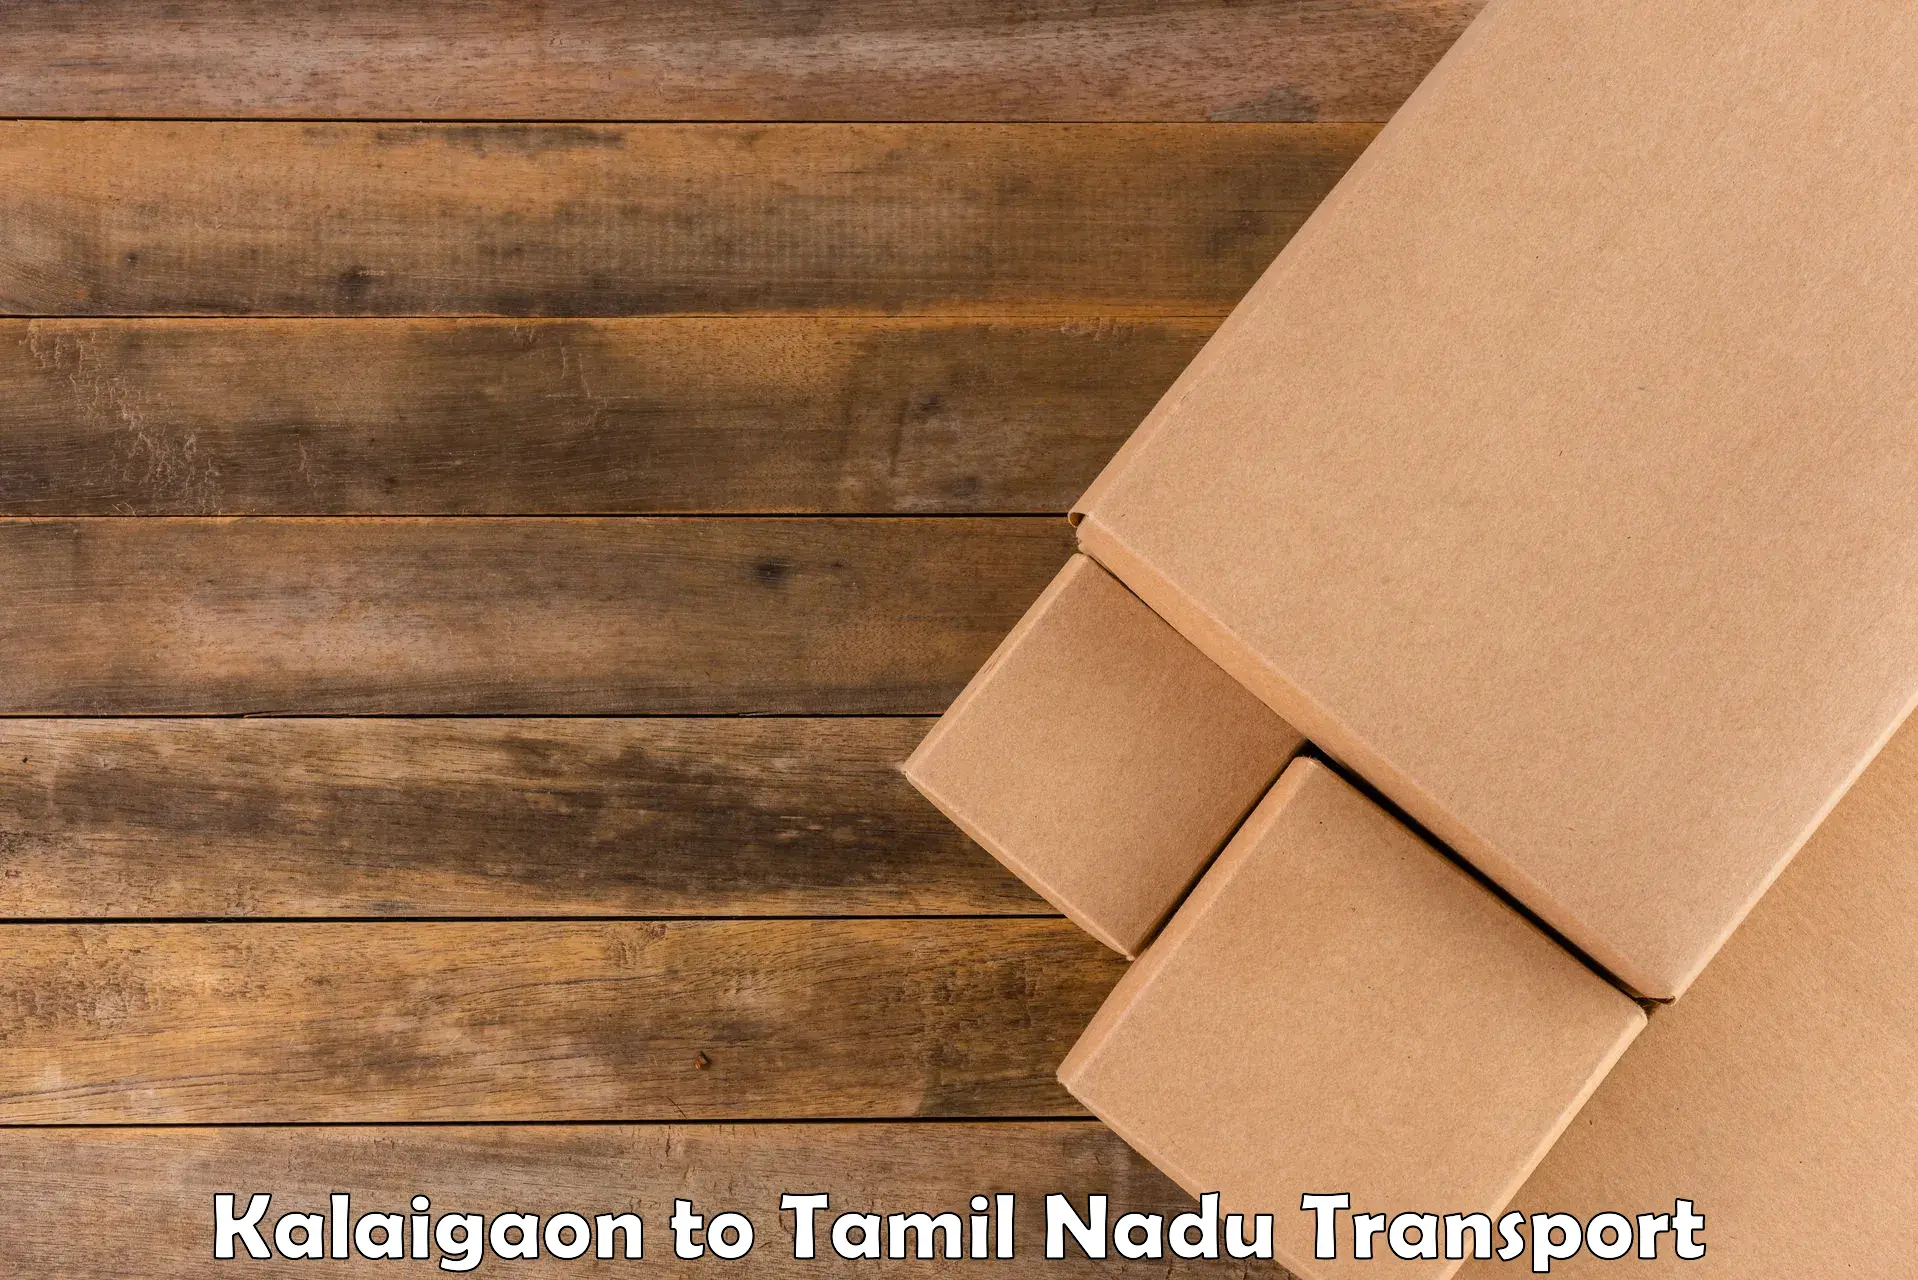 Parcel transport services in Kalaigaon to Tuticorin